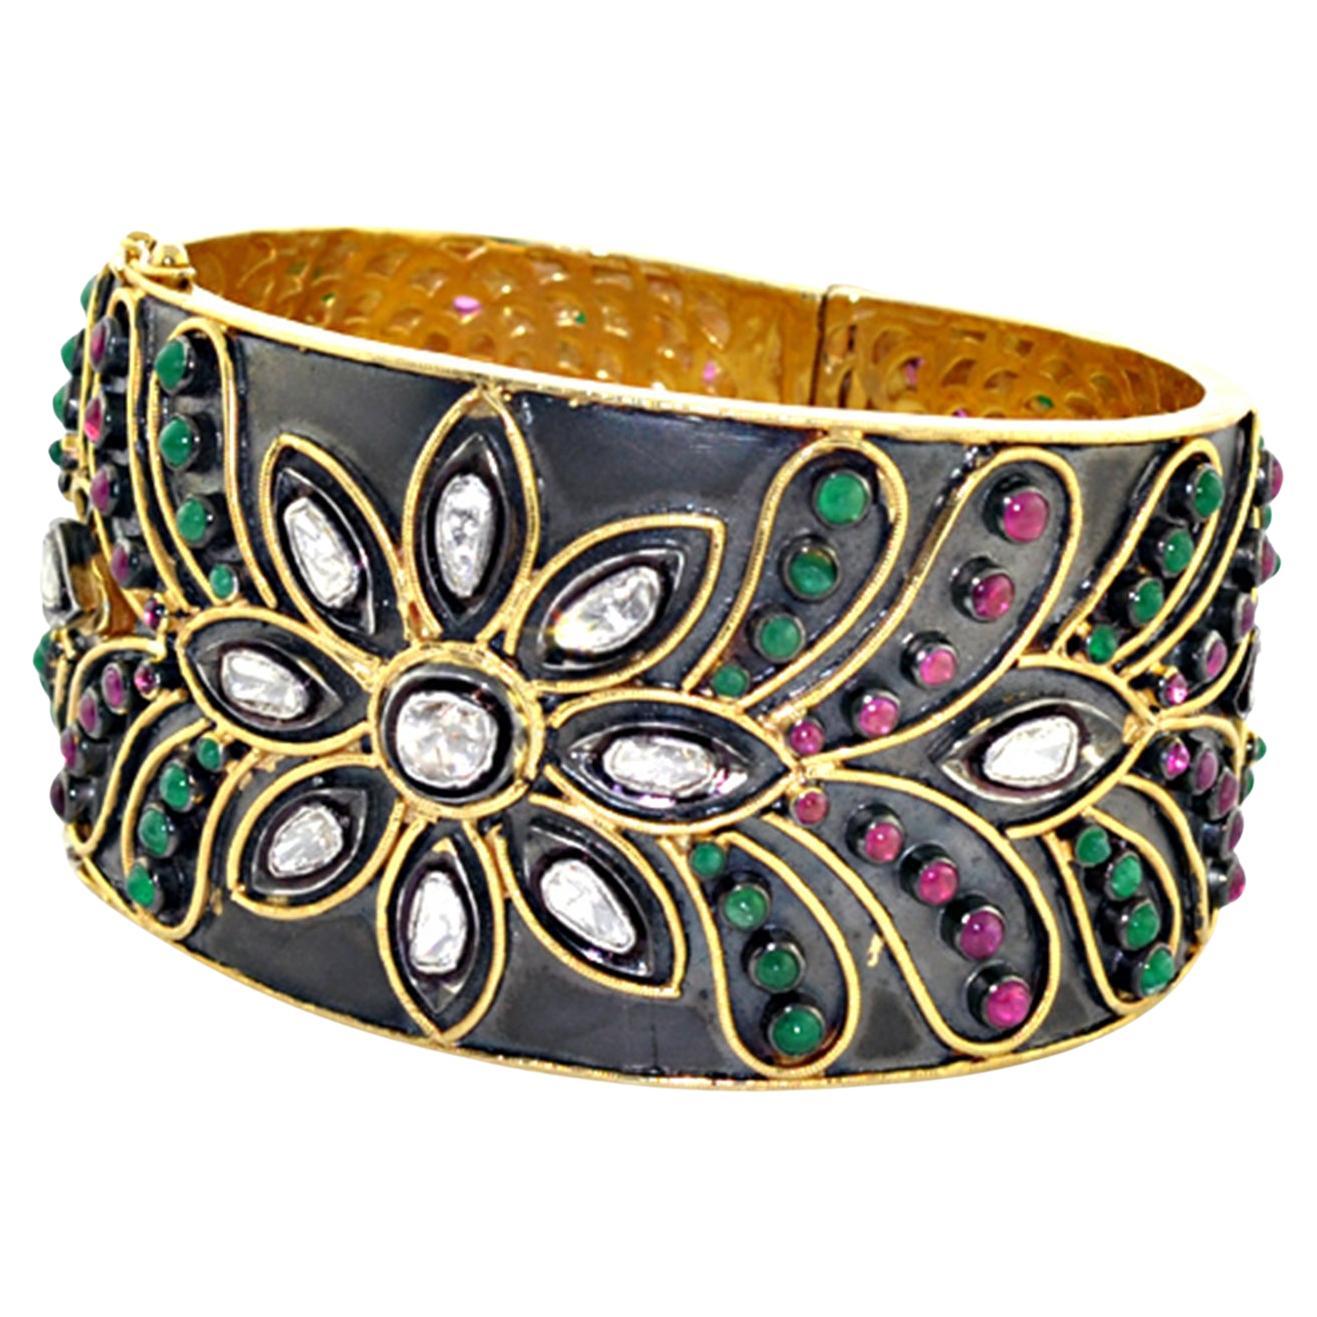 Precious Stones Studded Ethnic Looking Bracelet With Diamonds In 14k Yellow Gold